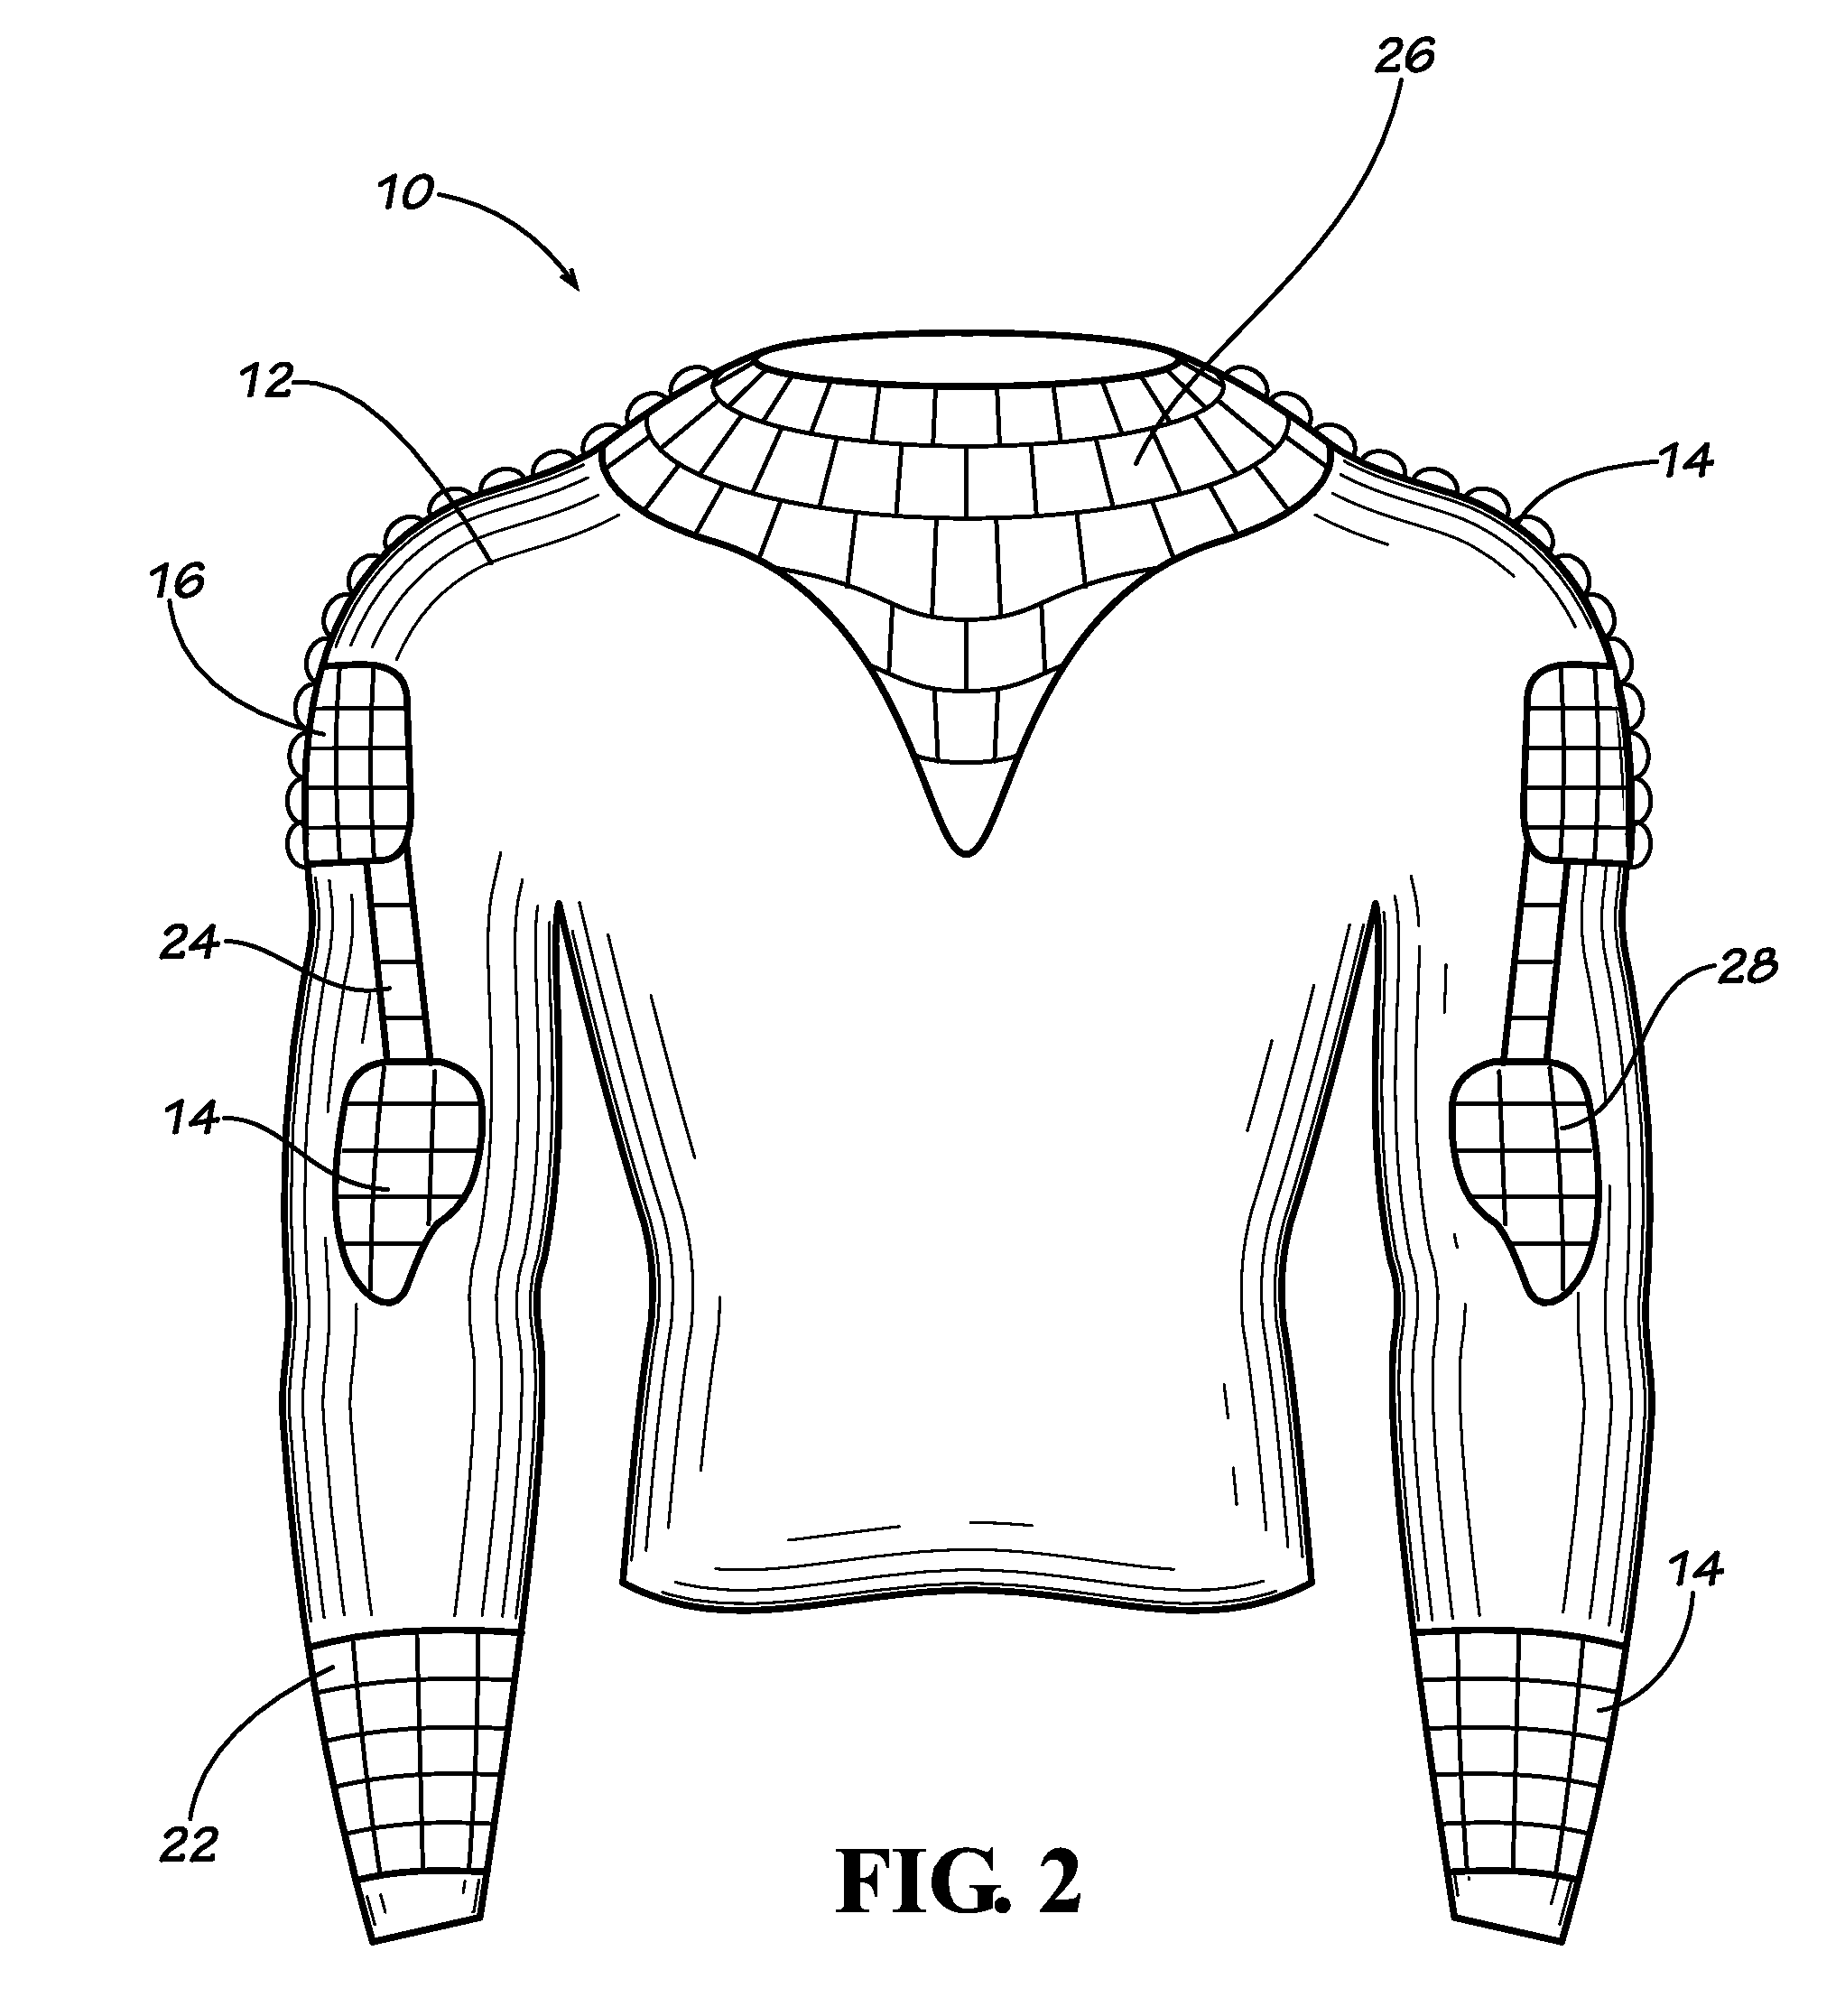 Clothing systems having resistance properties